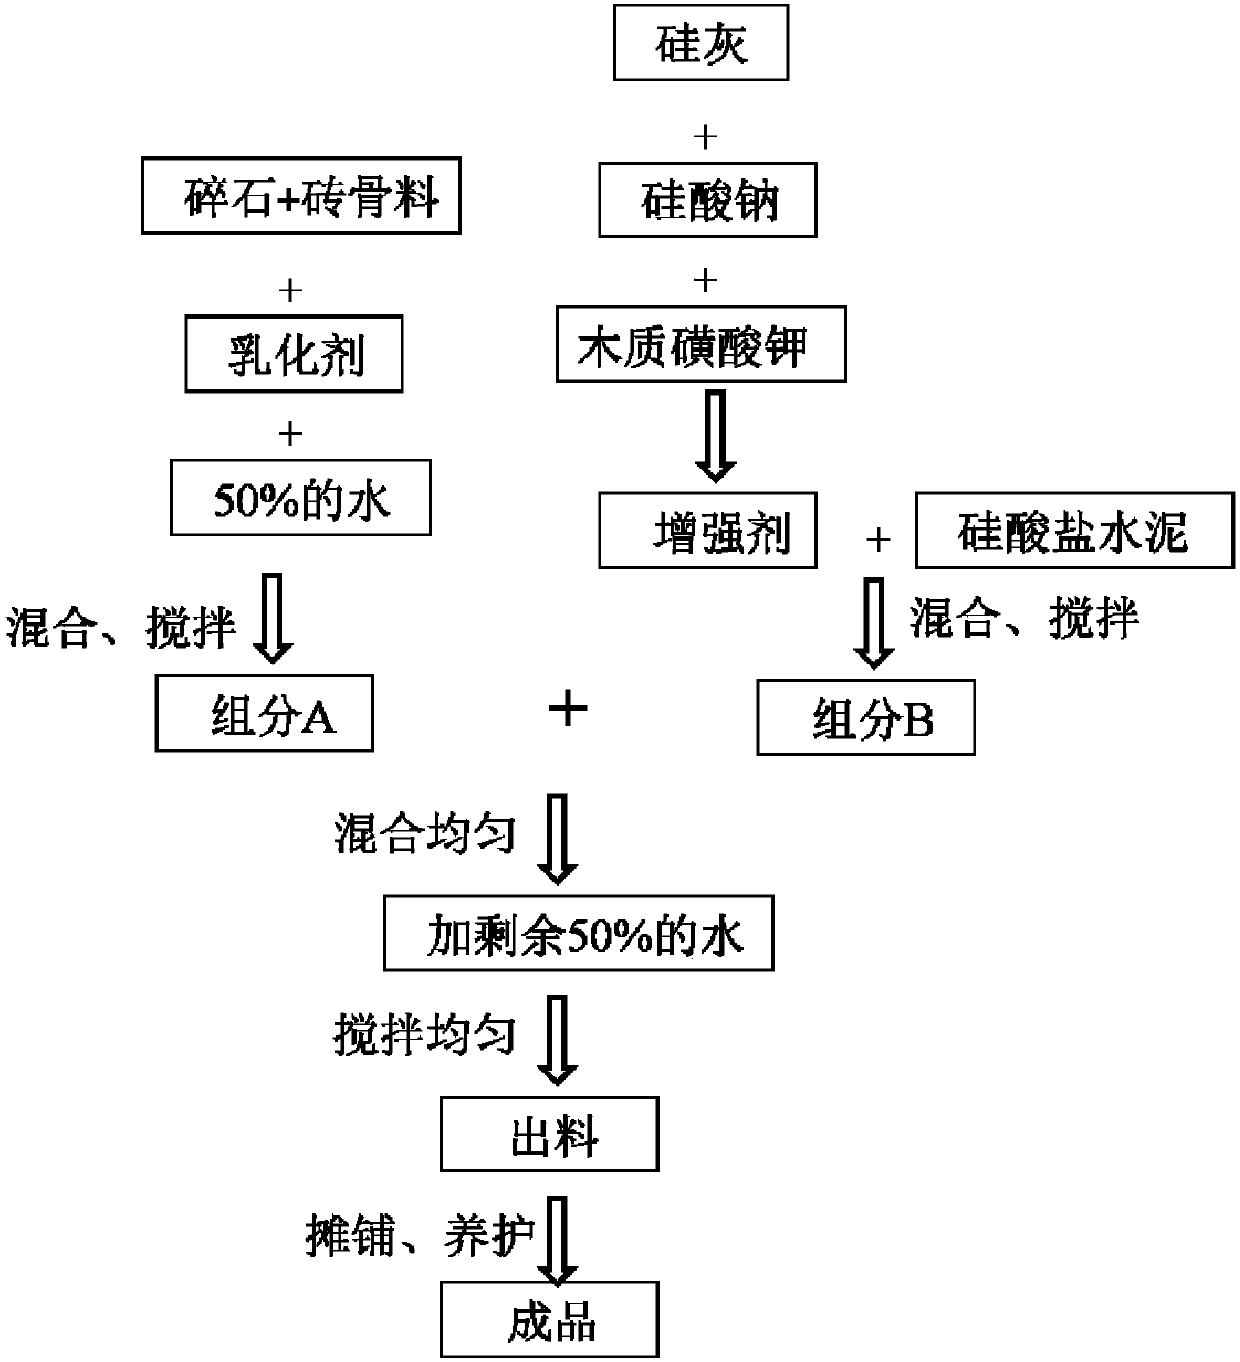 Concrete with high strength and high permeable rate and preparation method of concrete